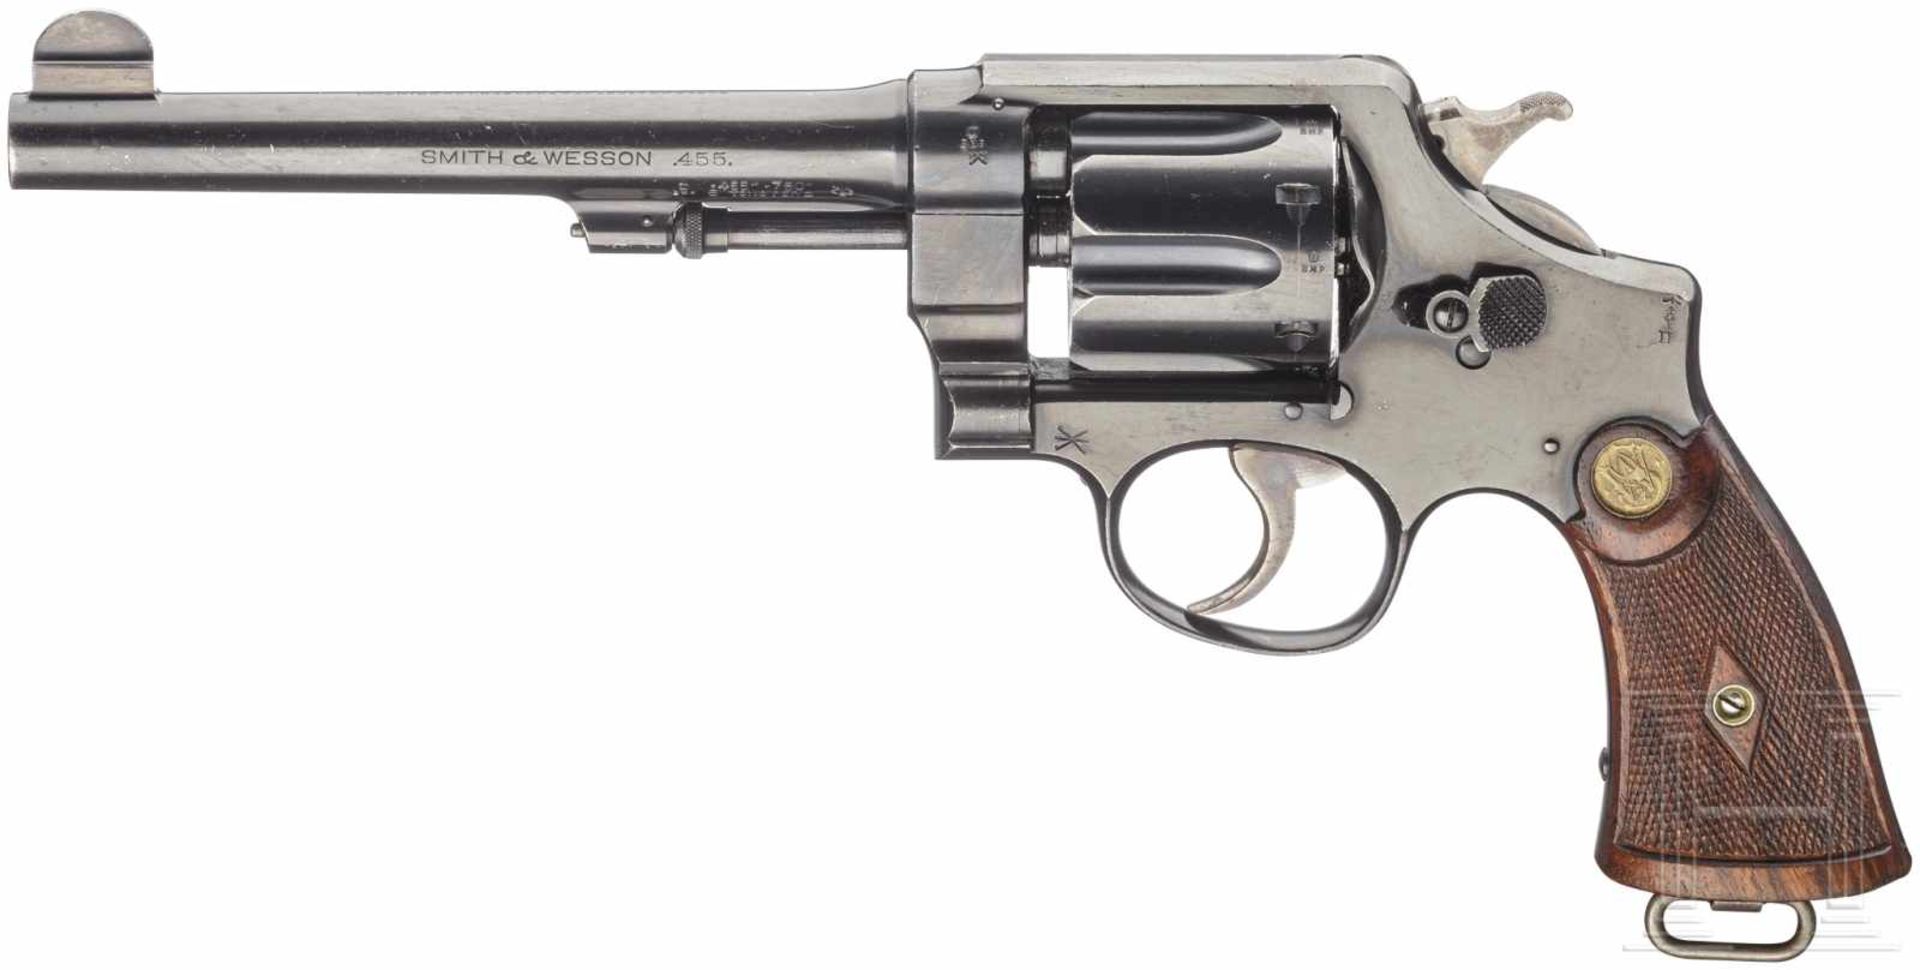 A Smith & Wesson .455 Mark II Hand Ejector, 2nd Model